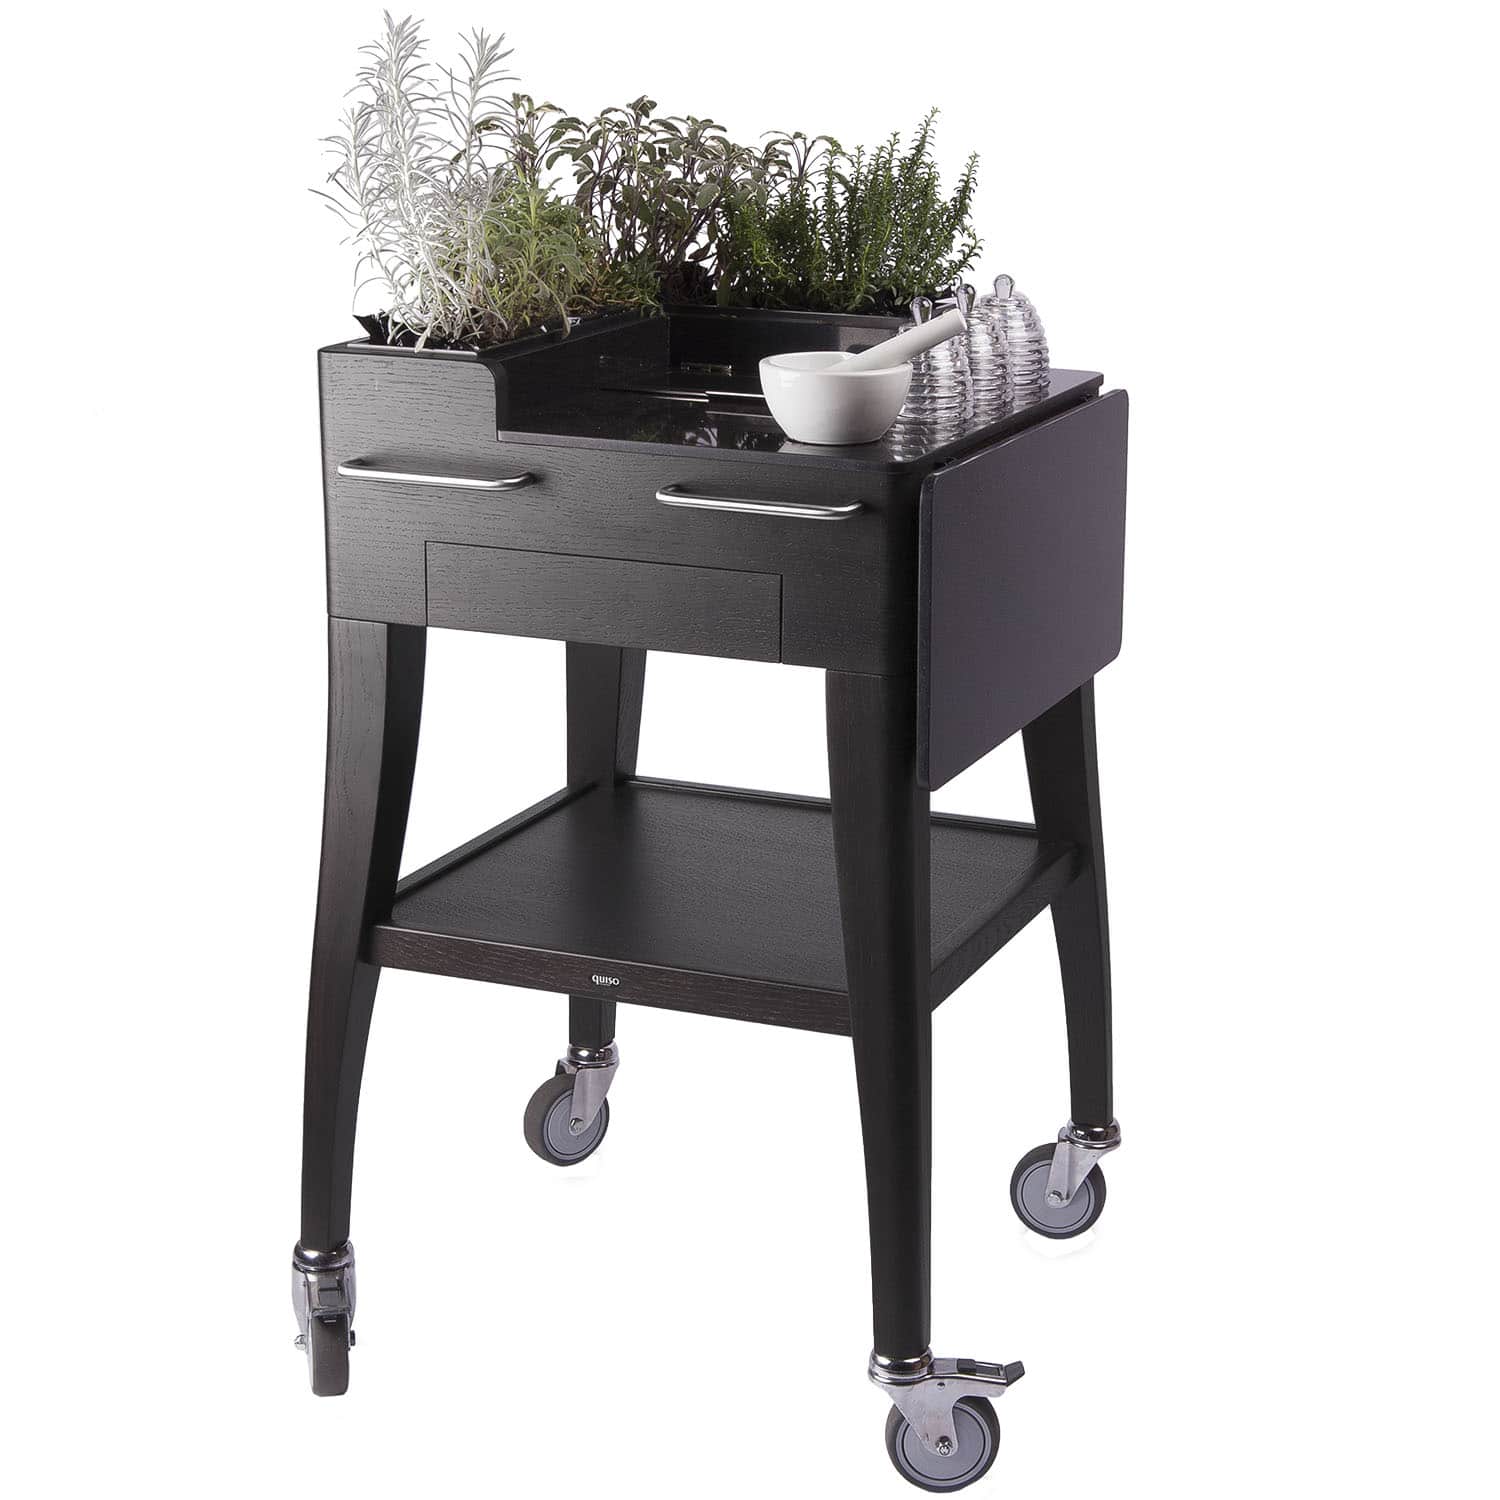 Tea and infusion trolley for fresh herbs, Jardin des infusions by QUISO in black oak, top and flap in black Quartz stone